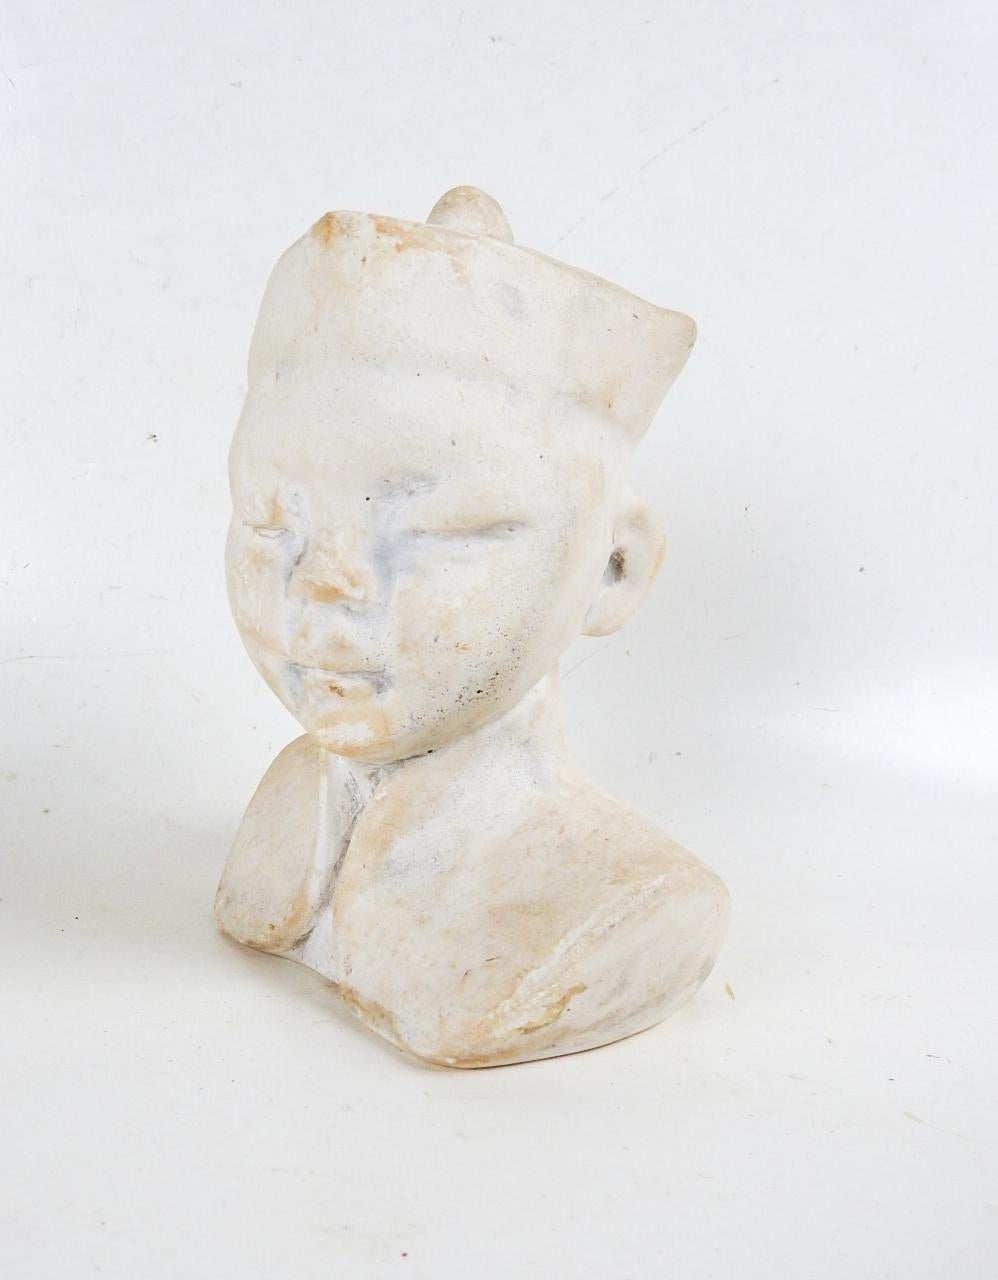 Vintage mid 20th century plaster bust of Chinese boy.  No markings, overall patina from handling, good condition.